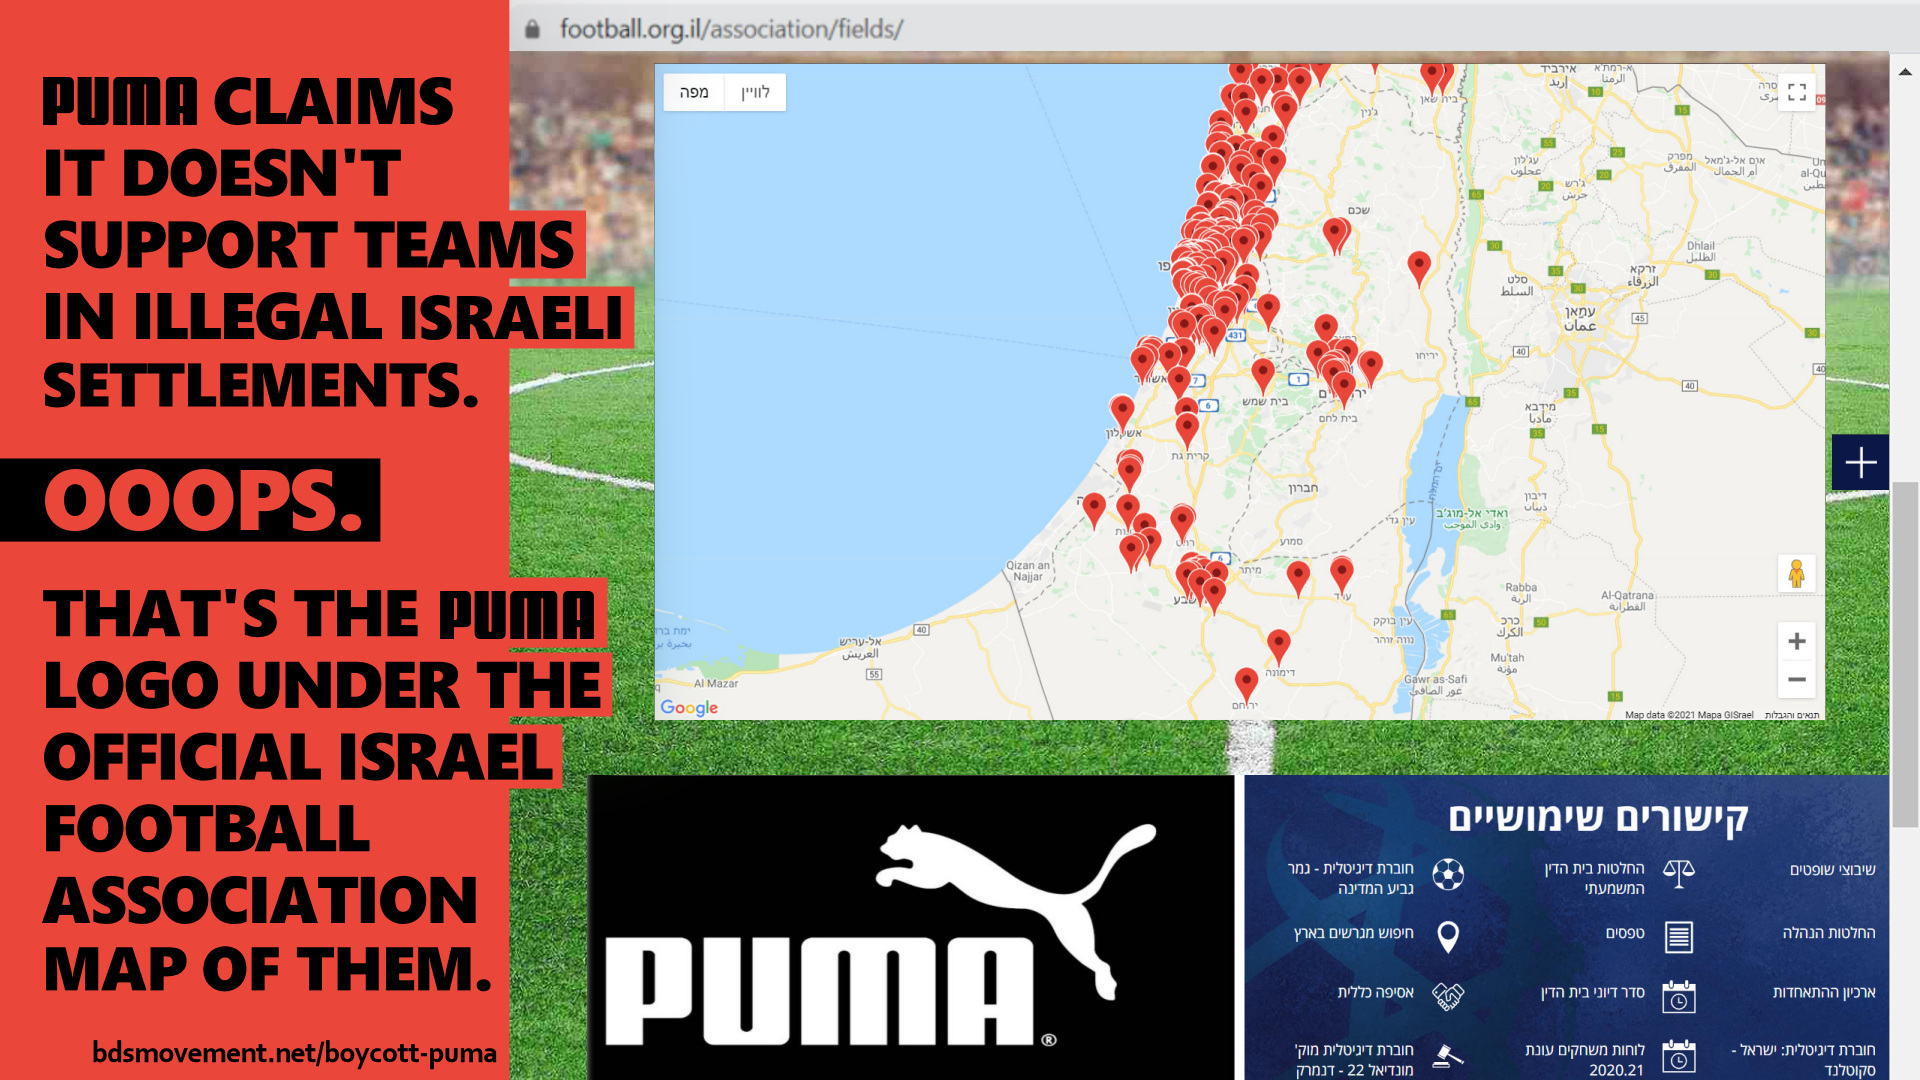 Puma says it doesn't support teams in illegal settlements. That's its logo on a map of them.